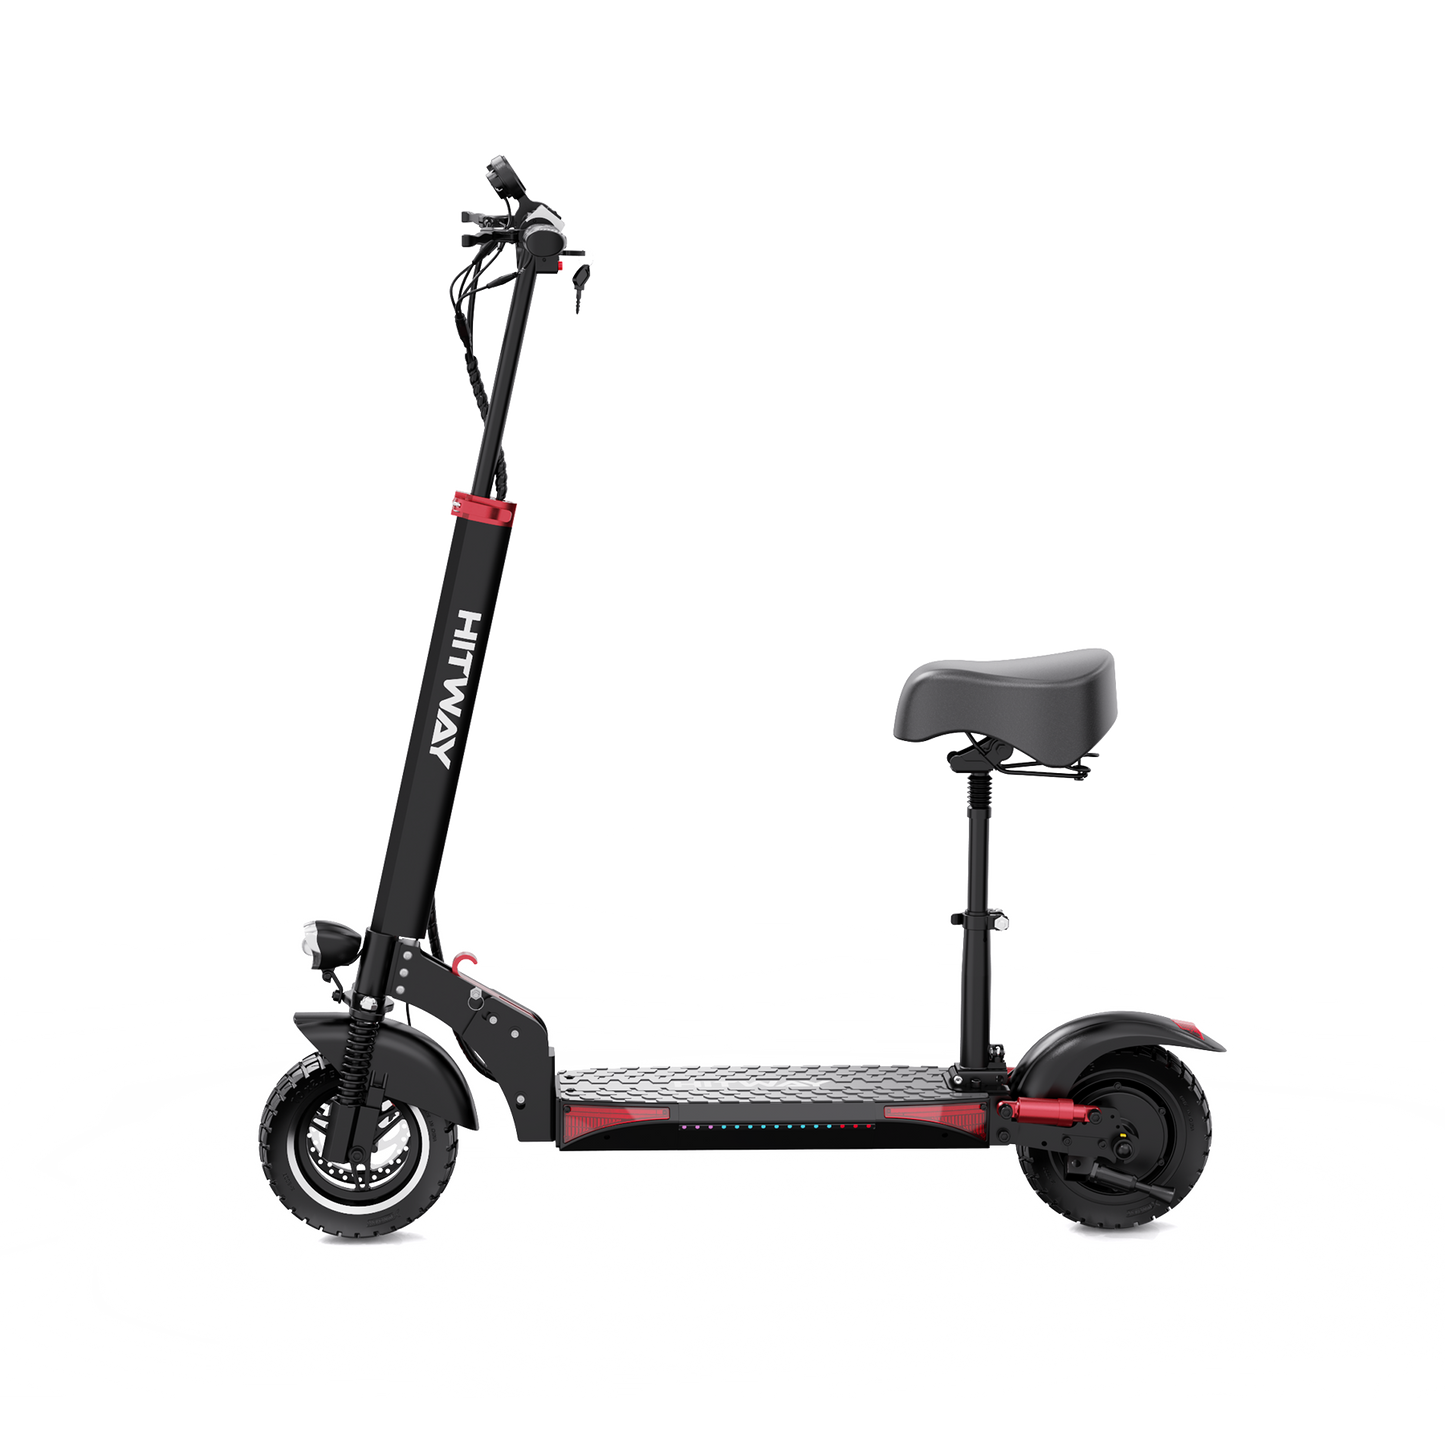 H5 Pro Electric Scooter